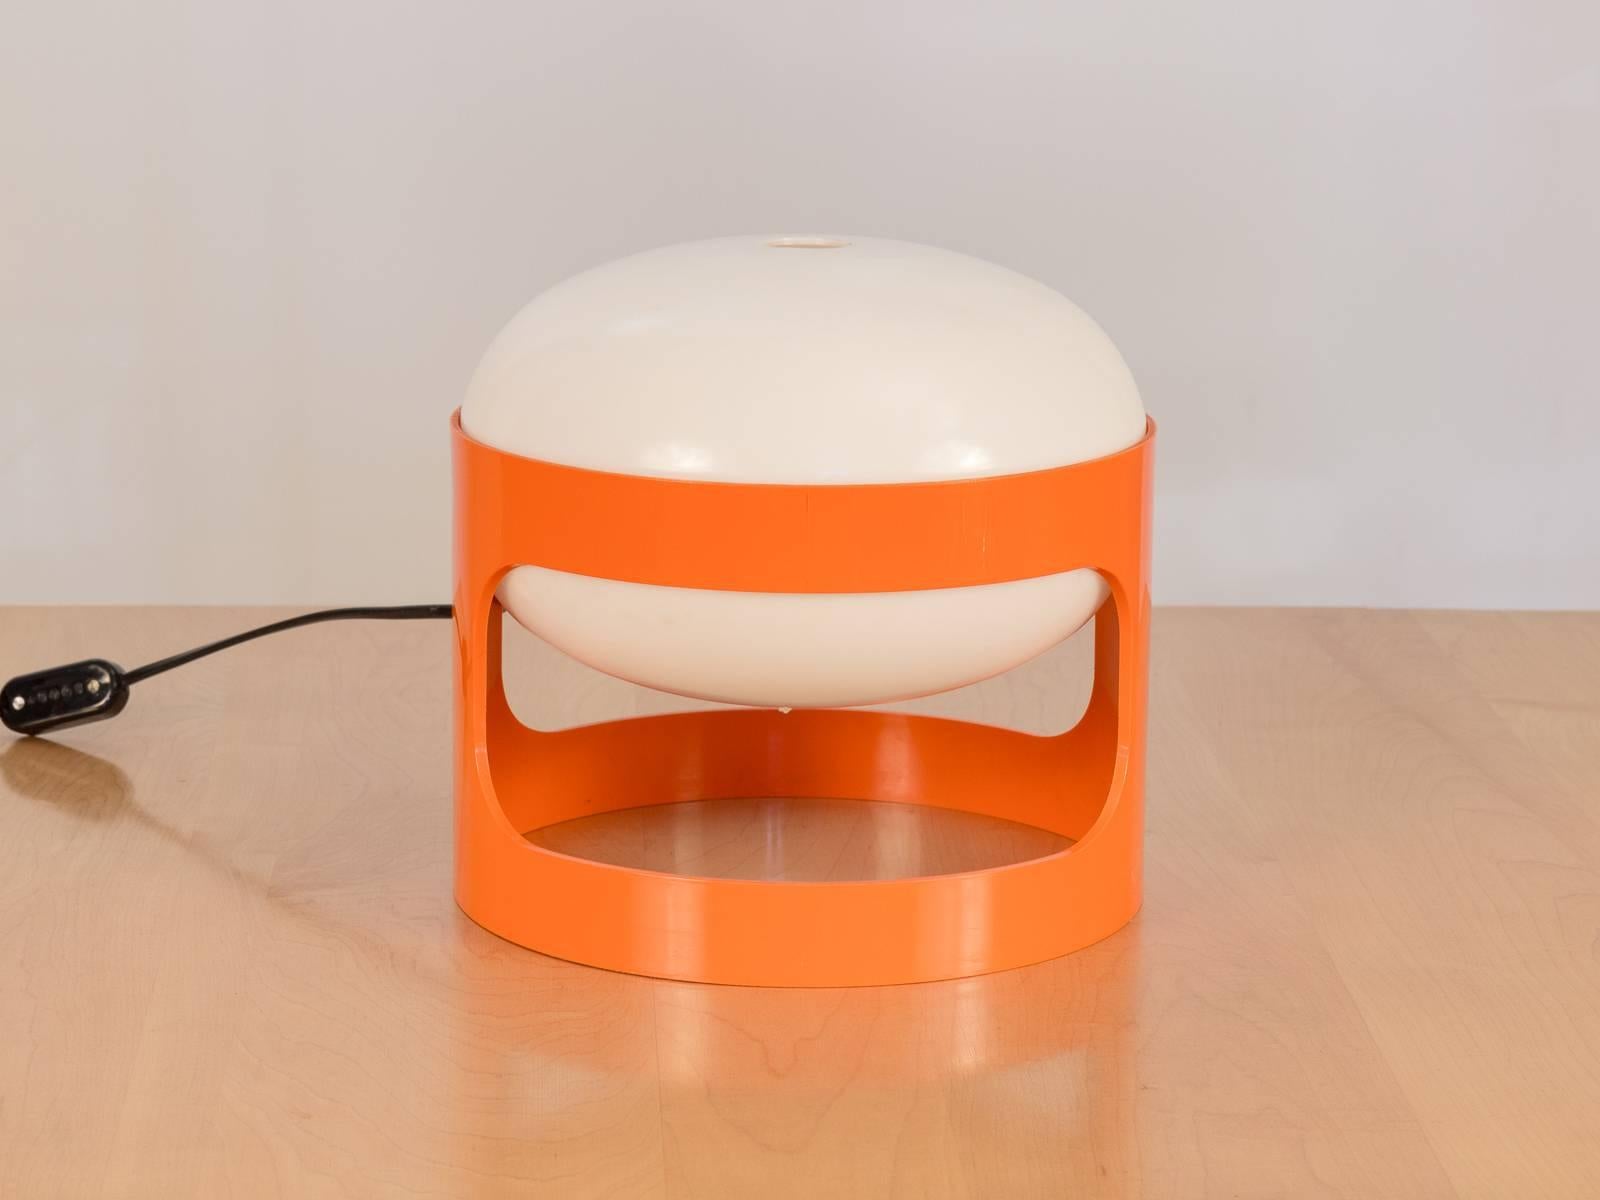 Space Age orange acrylic KD27 table lamp designed by Joe Colombo for Kartell in 1967. Base and lamp are in excellent vintage condition, glossy and vivid. Light works perfectly.

    